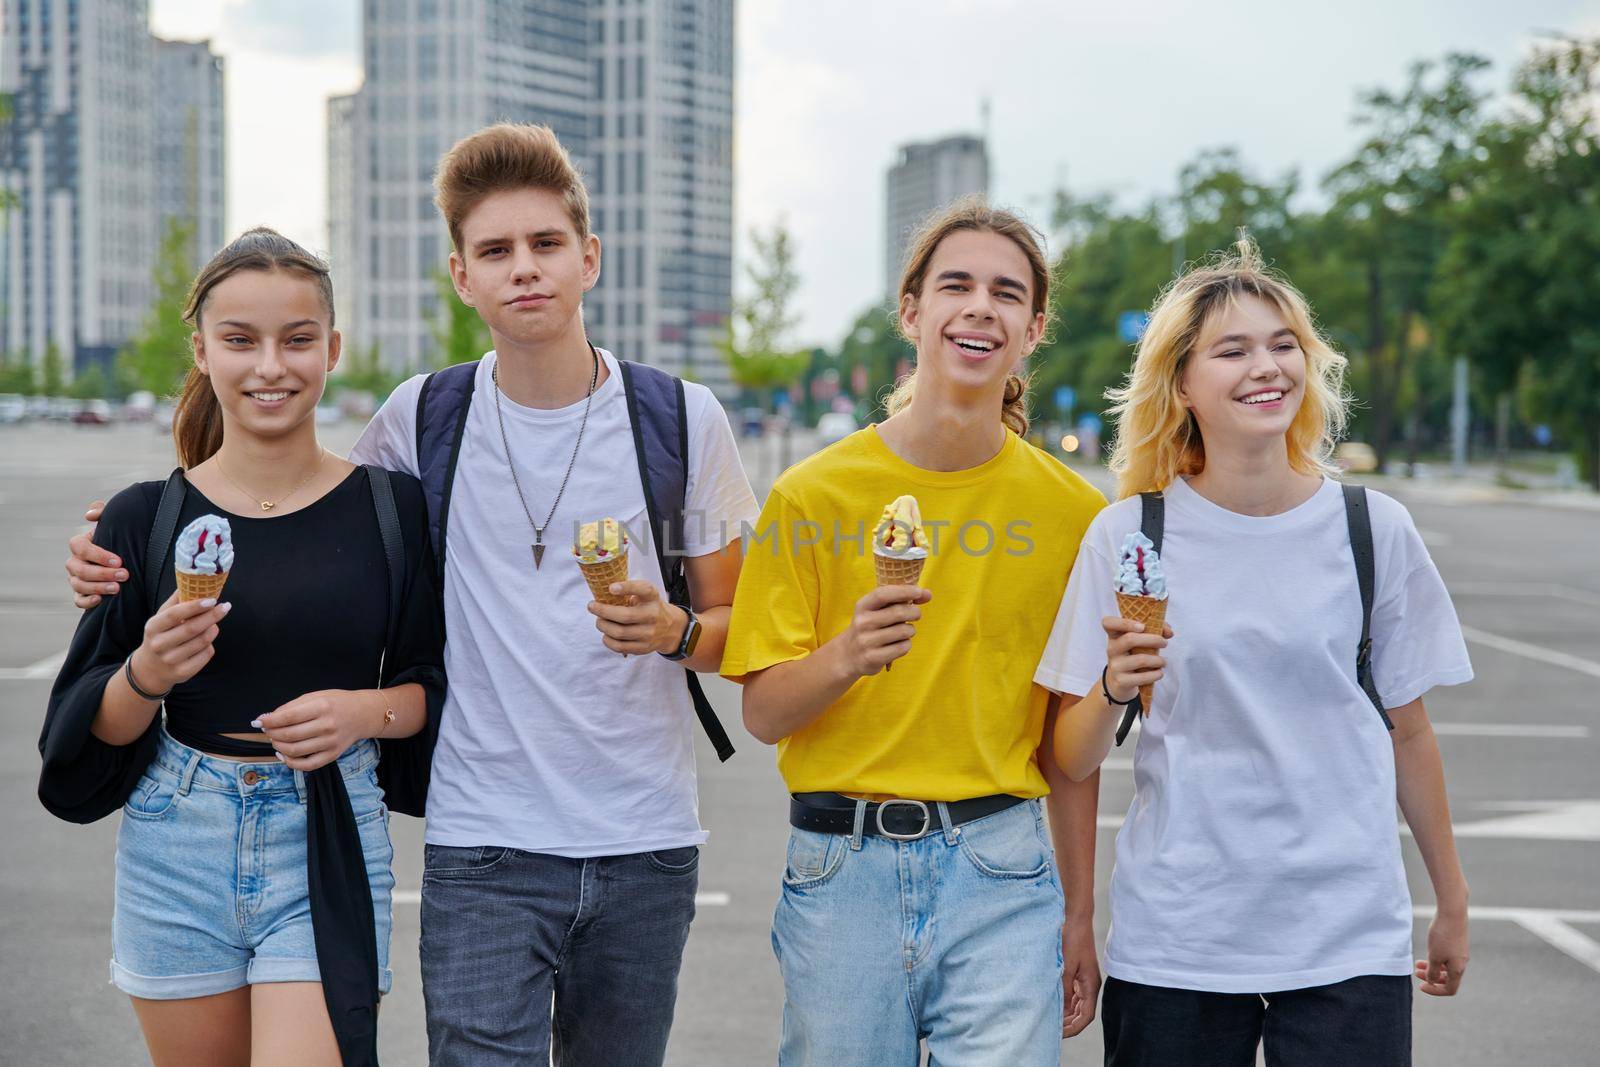 Group portrait of happy teenagers walking together with ice cream. Four smiling young people in city, lifestyle, friendship, adolescence, urban style, summer, leisure, youth concept